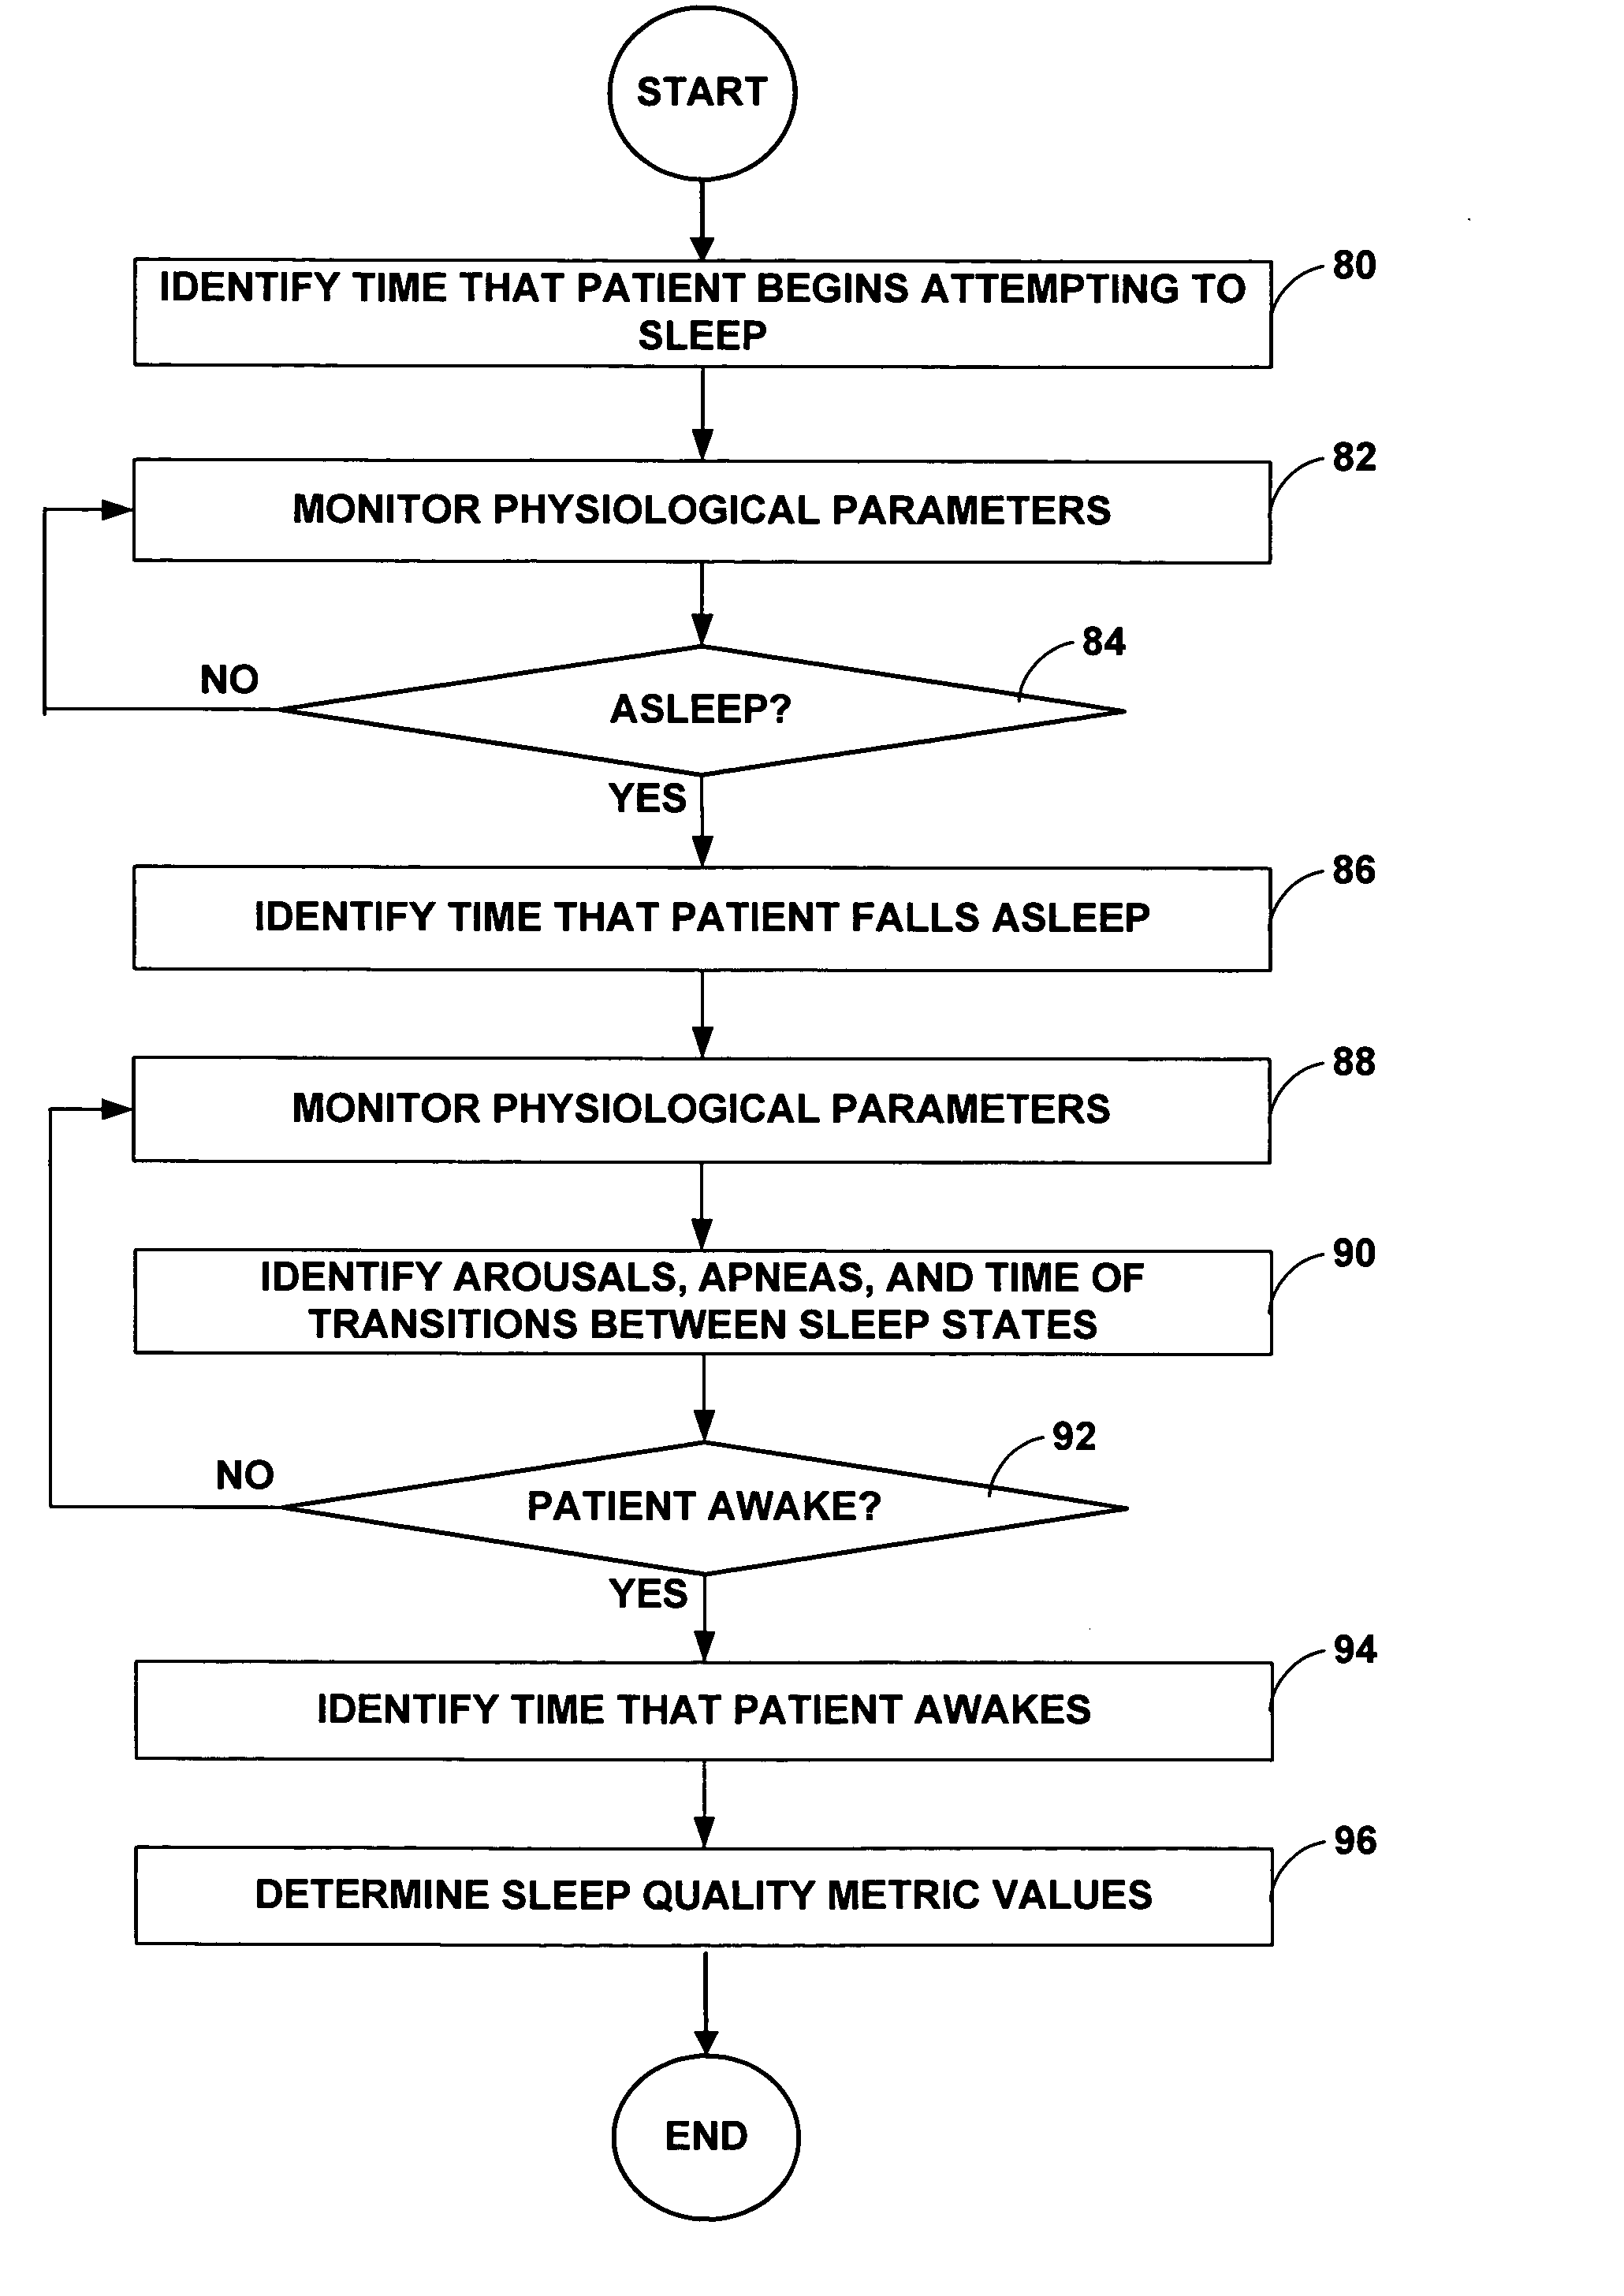 Collecting activity and sleep quality information via a medical device